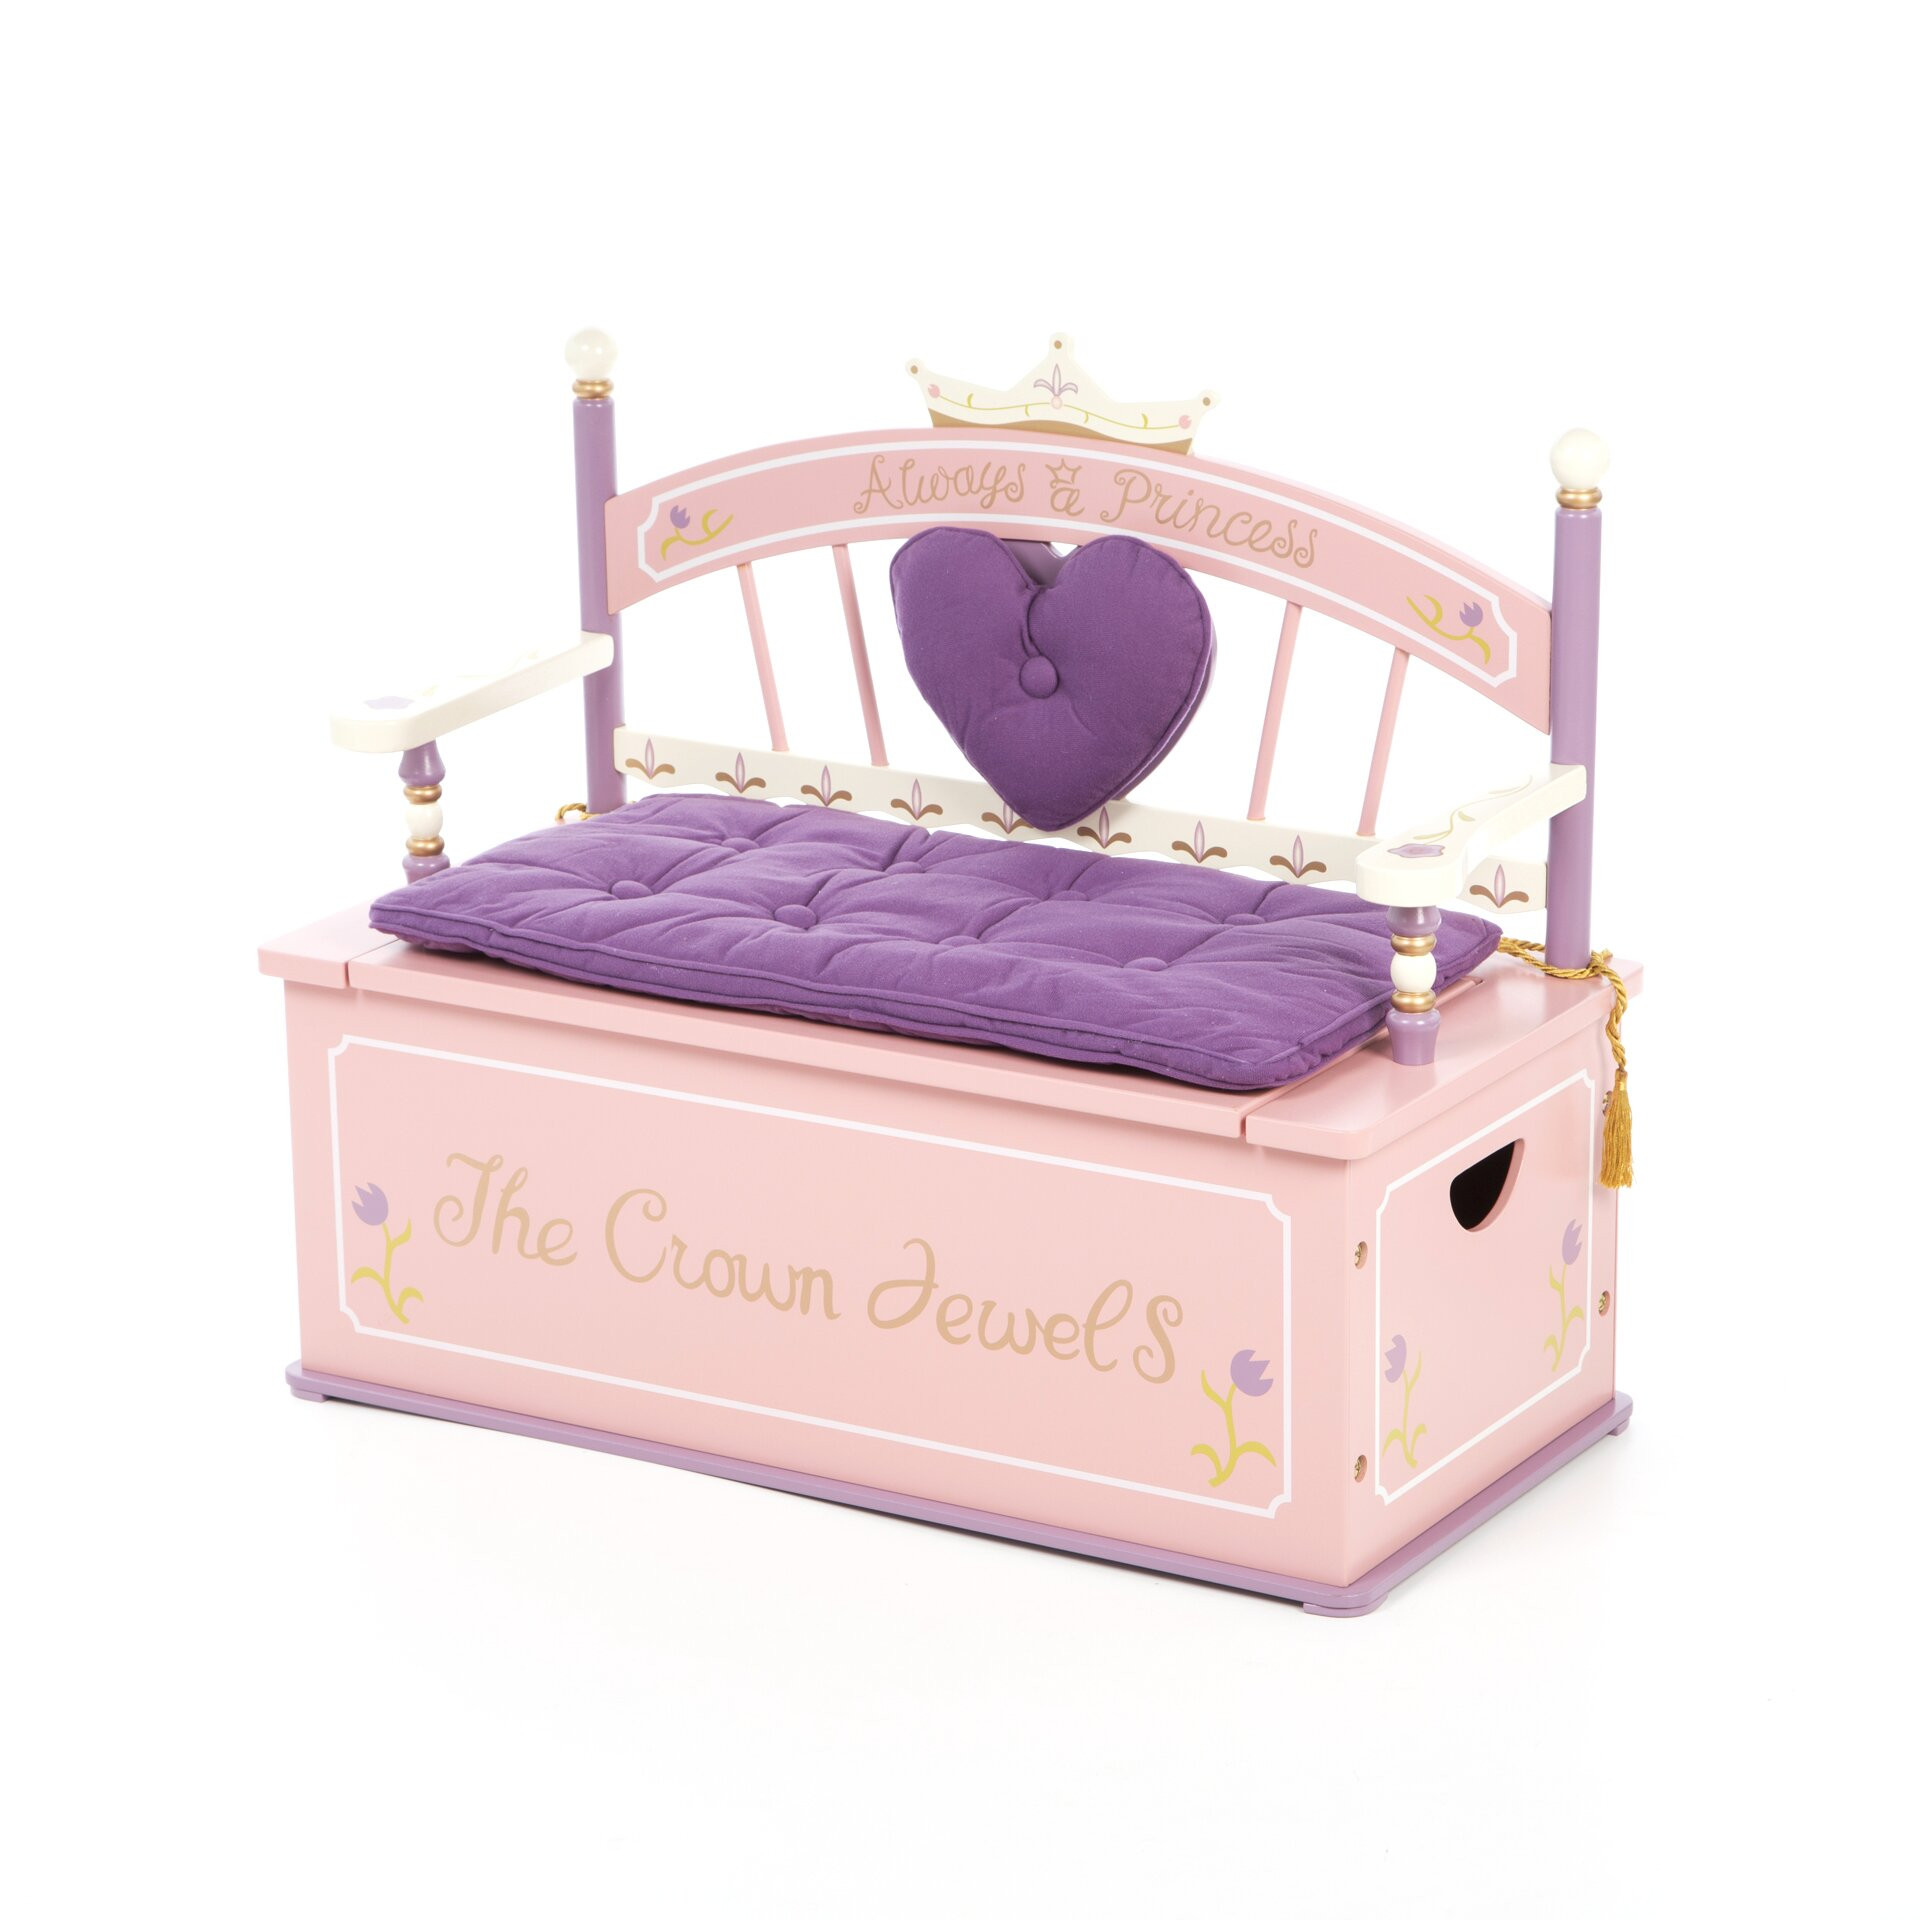 Kids Bench With Storage
 Levels of Discovery Princess Kids Bench with Storage